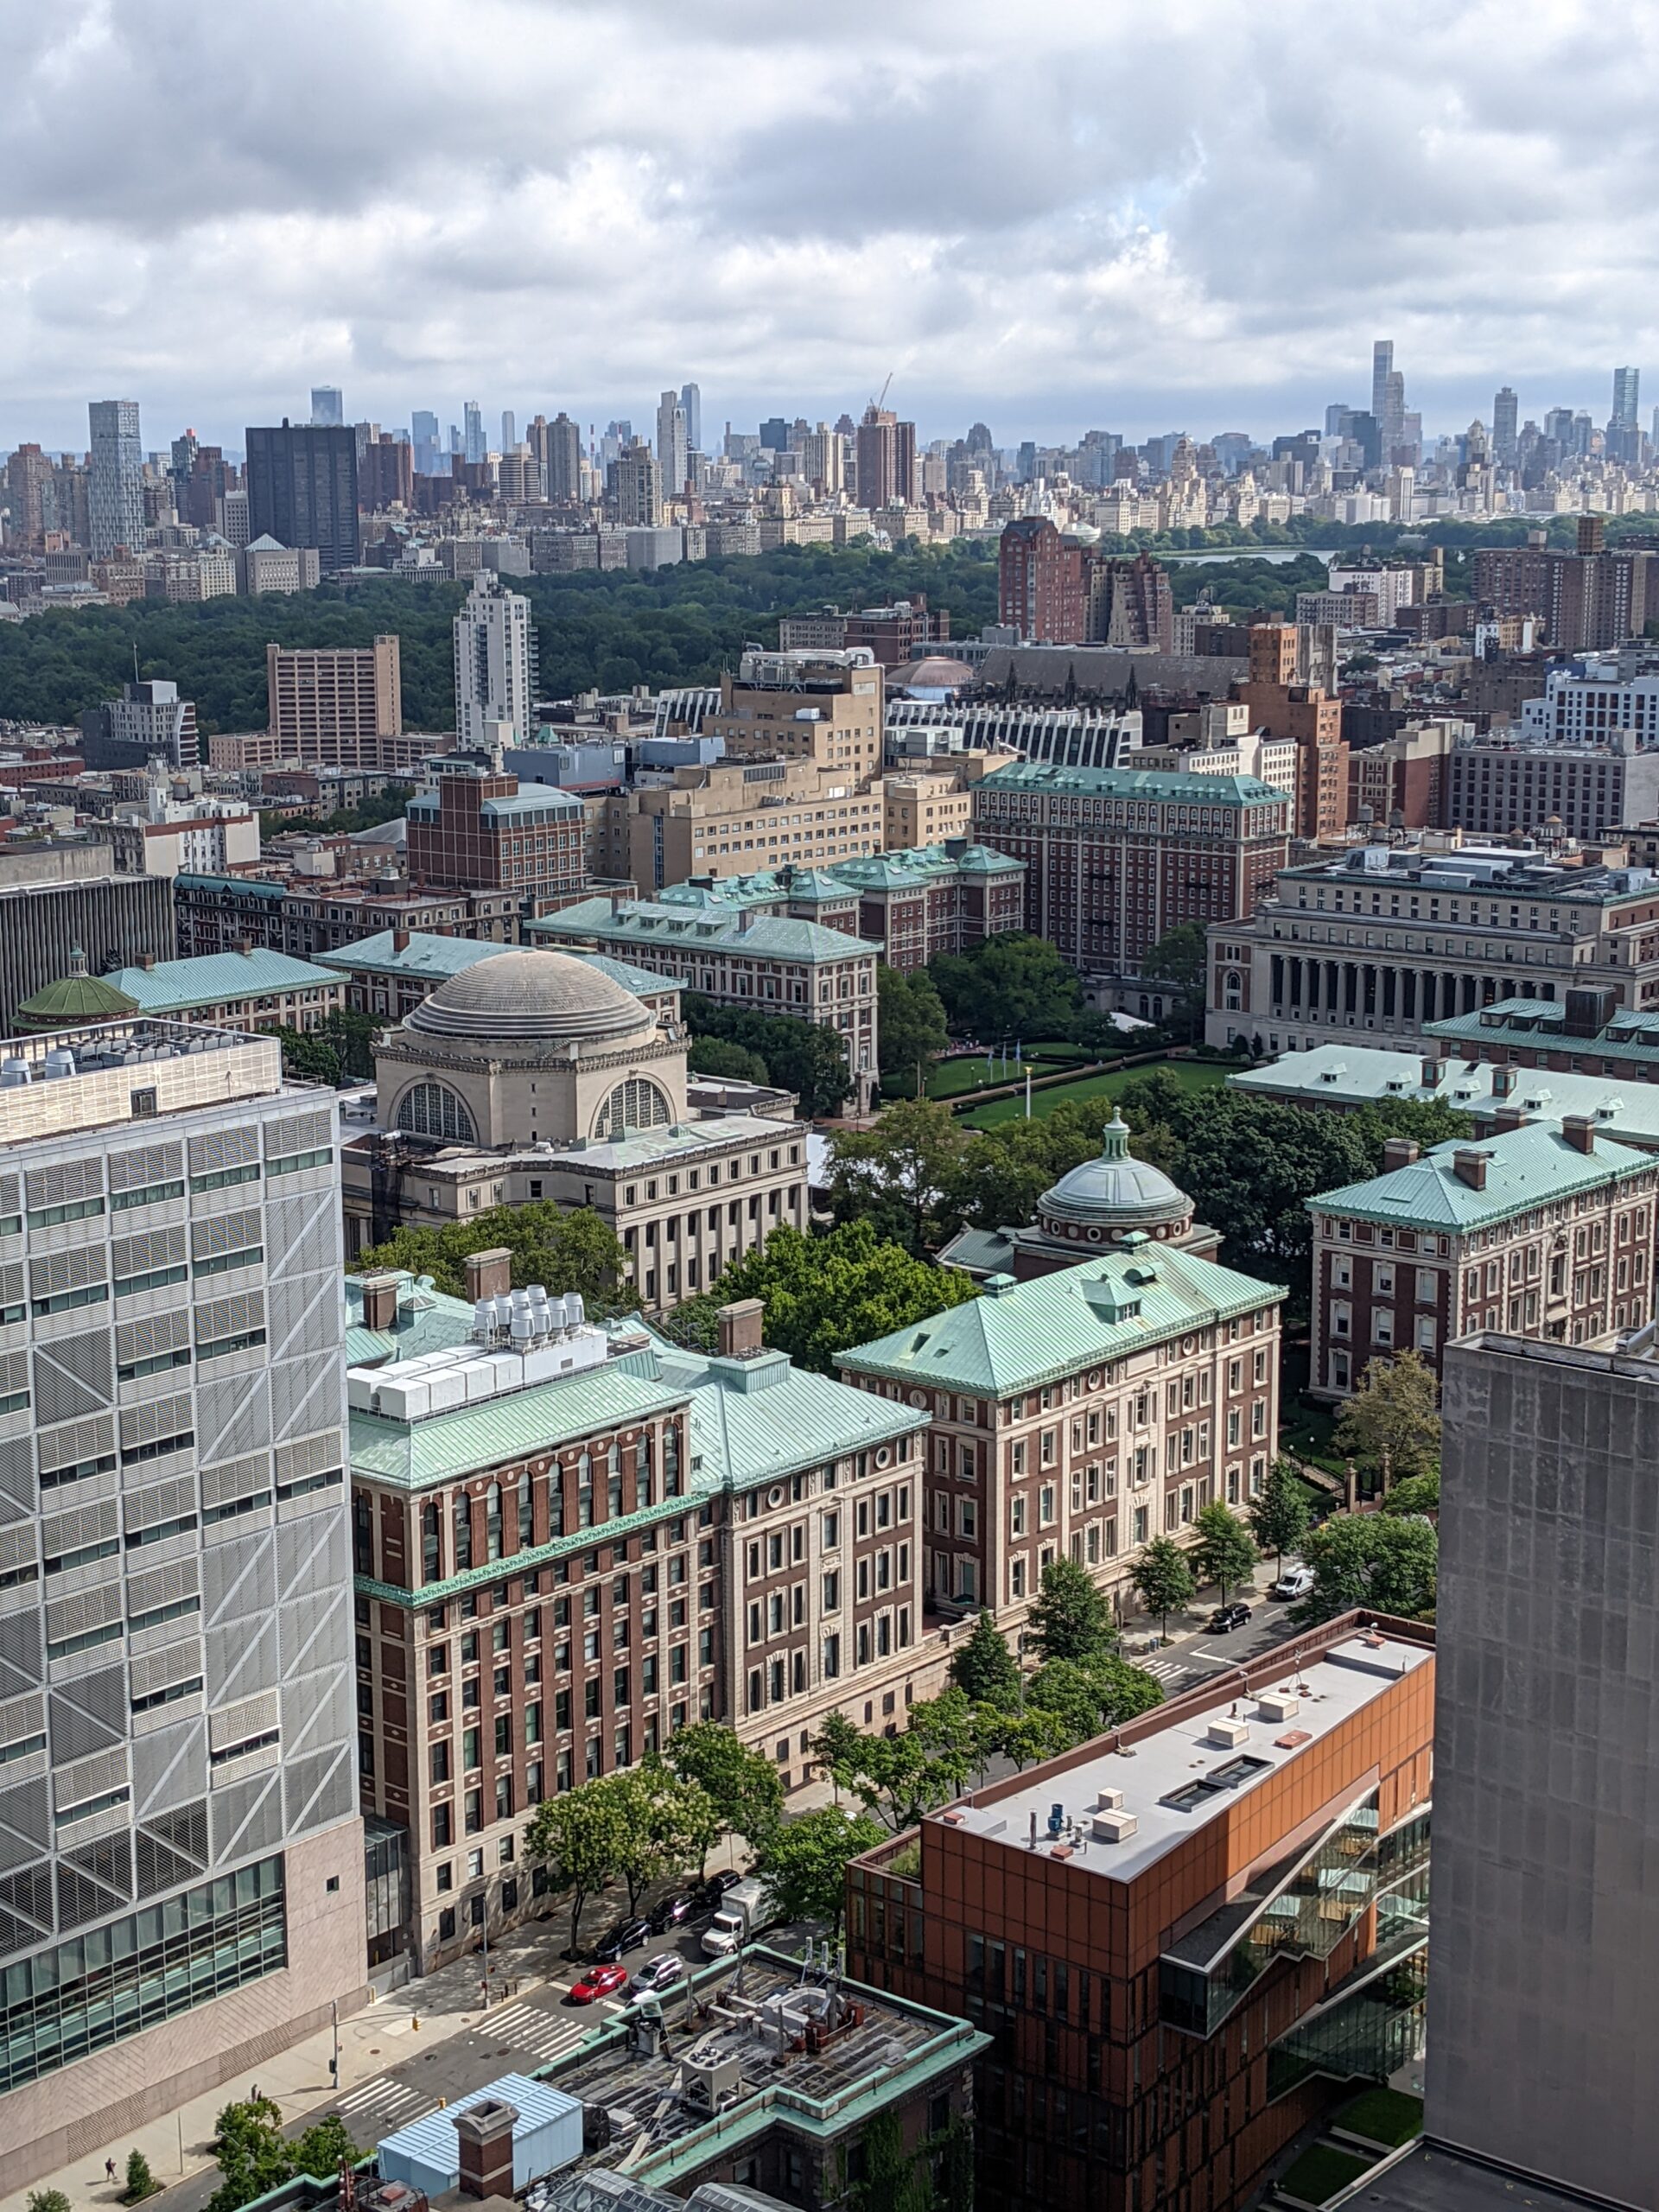 a birds eye view of Columbia University campus, Morningside Heights, Central Park and beyond